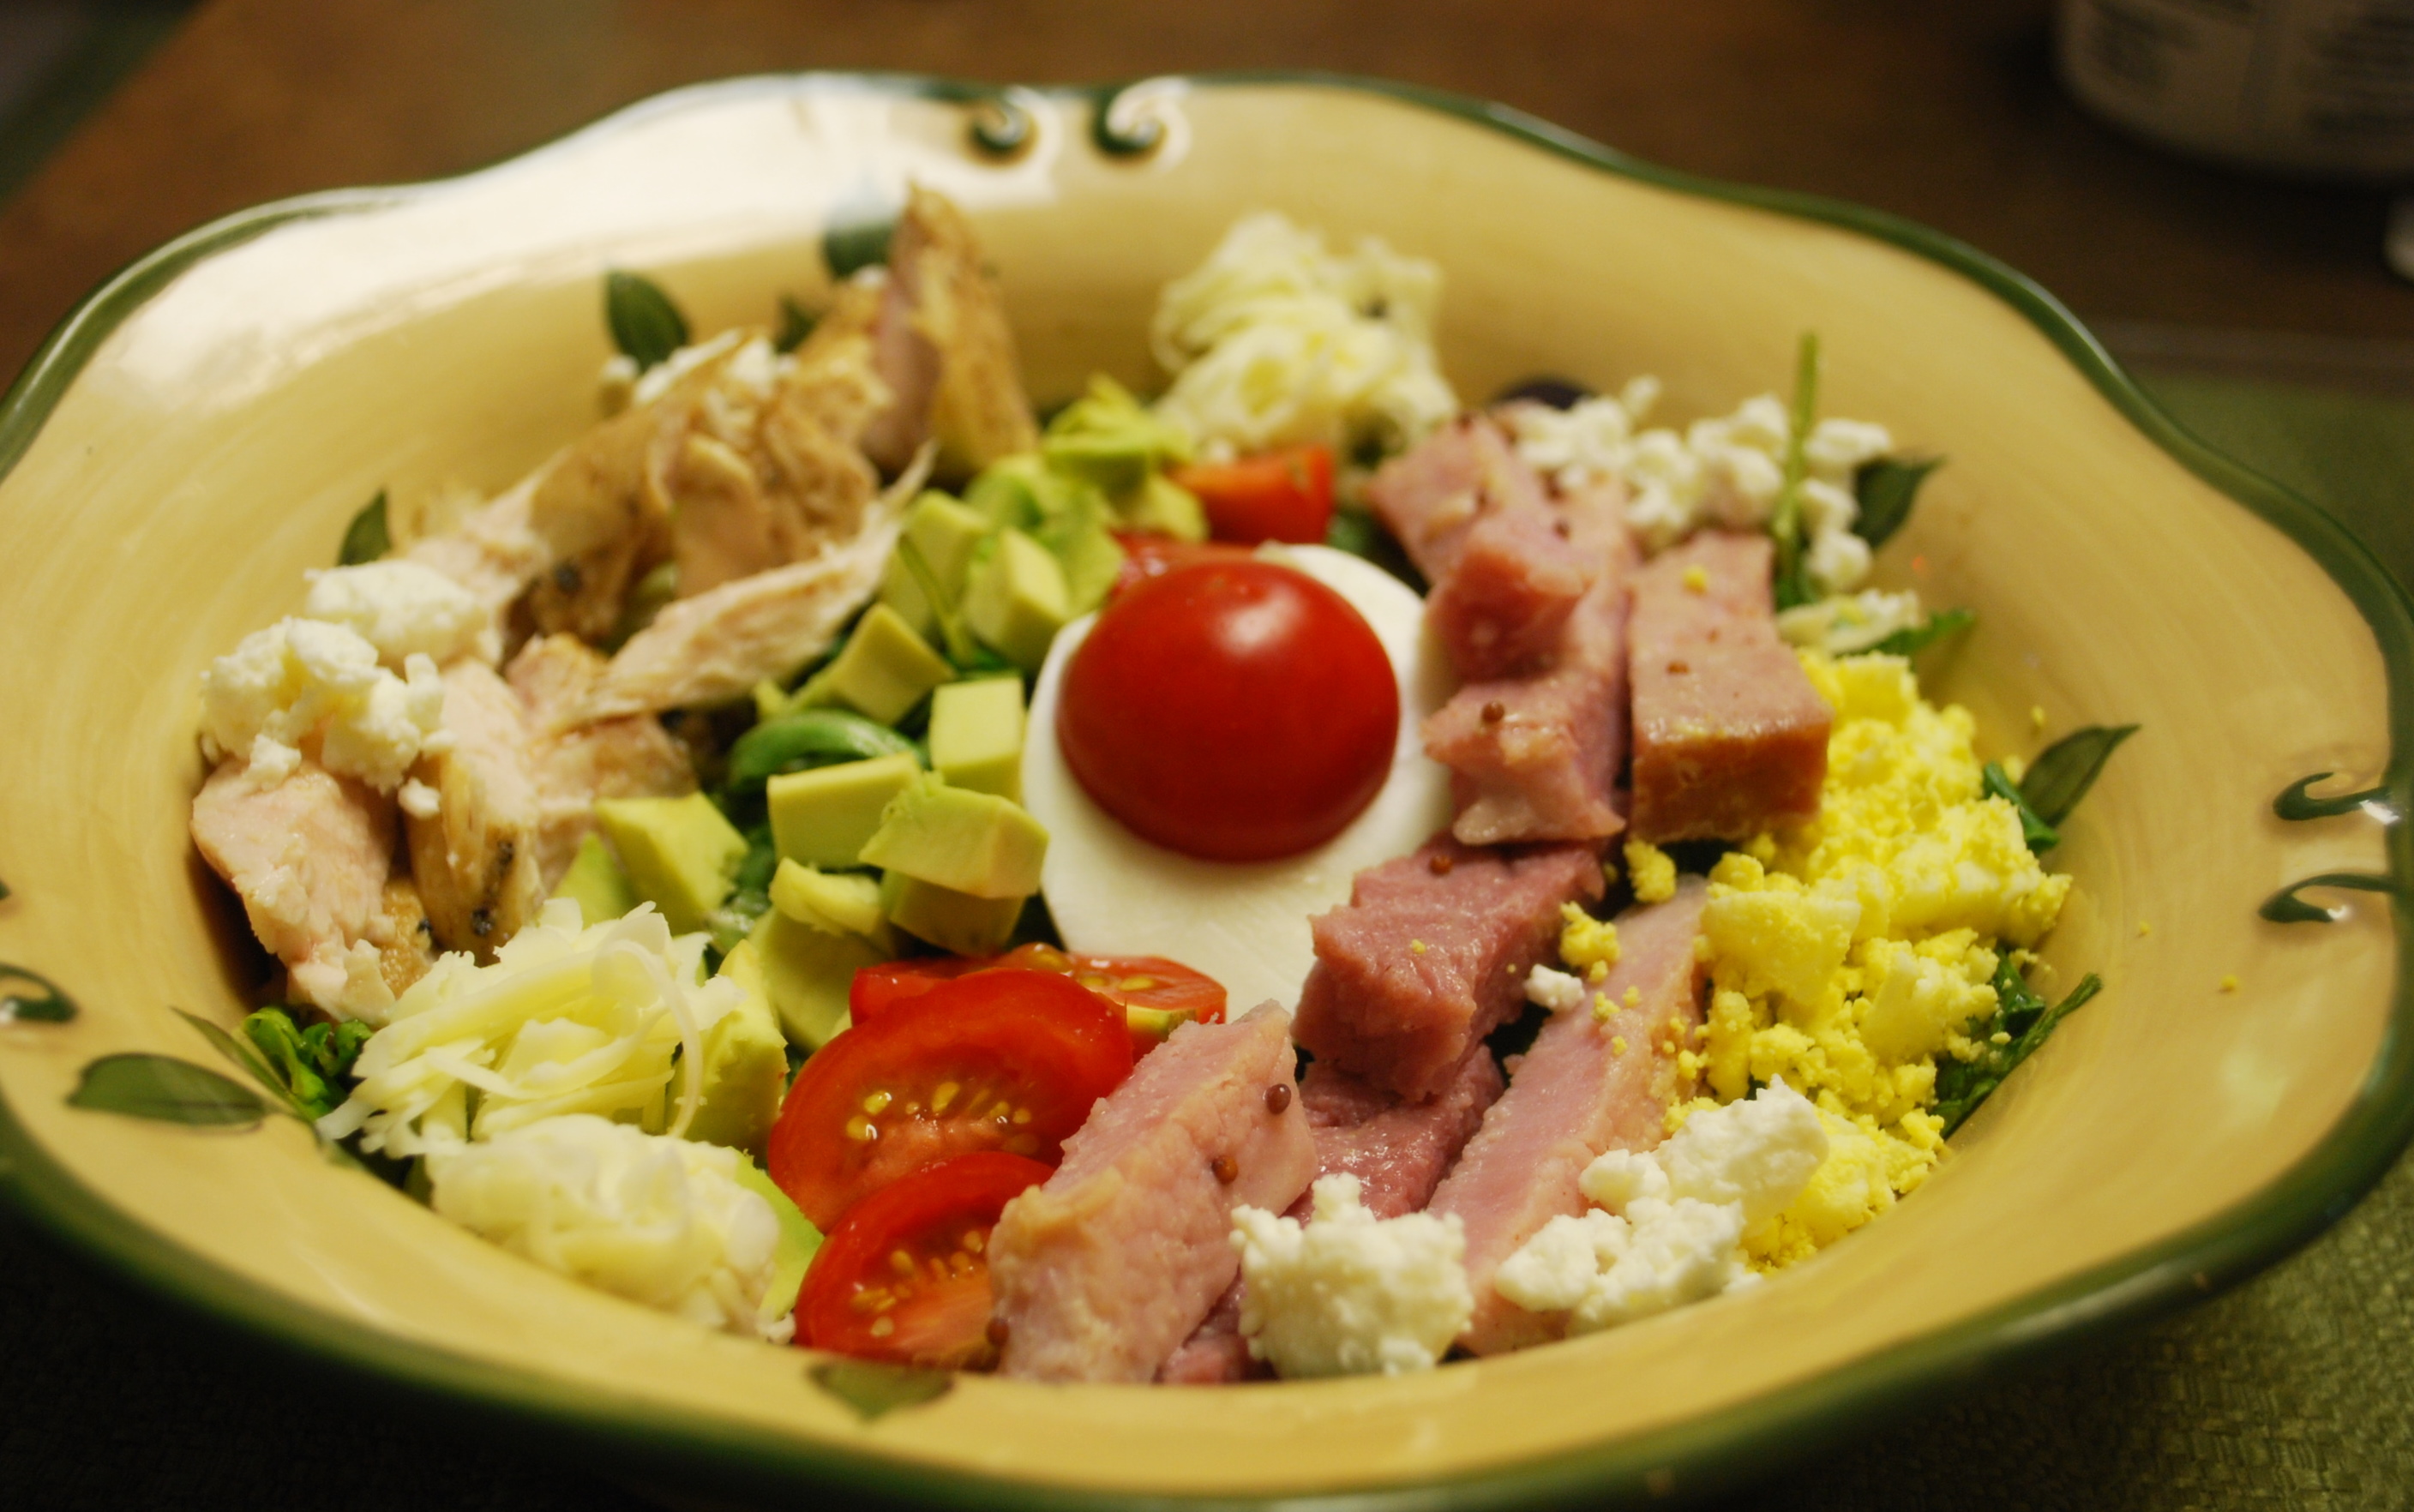 Cobb Salad: Romaine, Baby spinach, Baby arugula, chicken, ham, egg, tomatoes, avocado, feta and cheddar cheese in home made dressing.